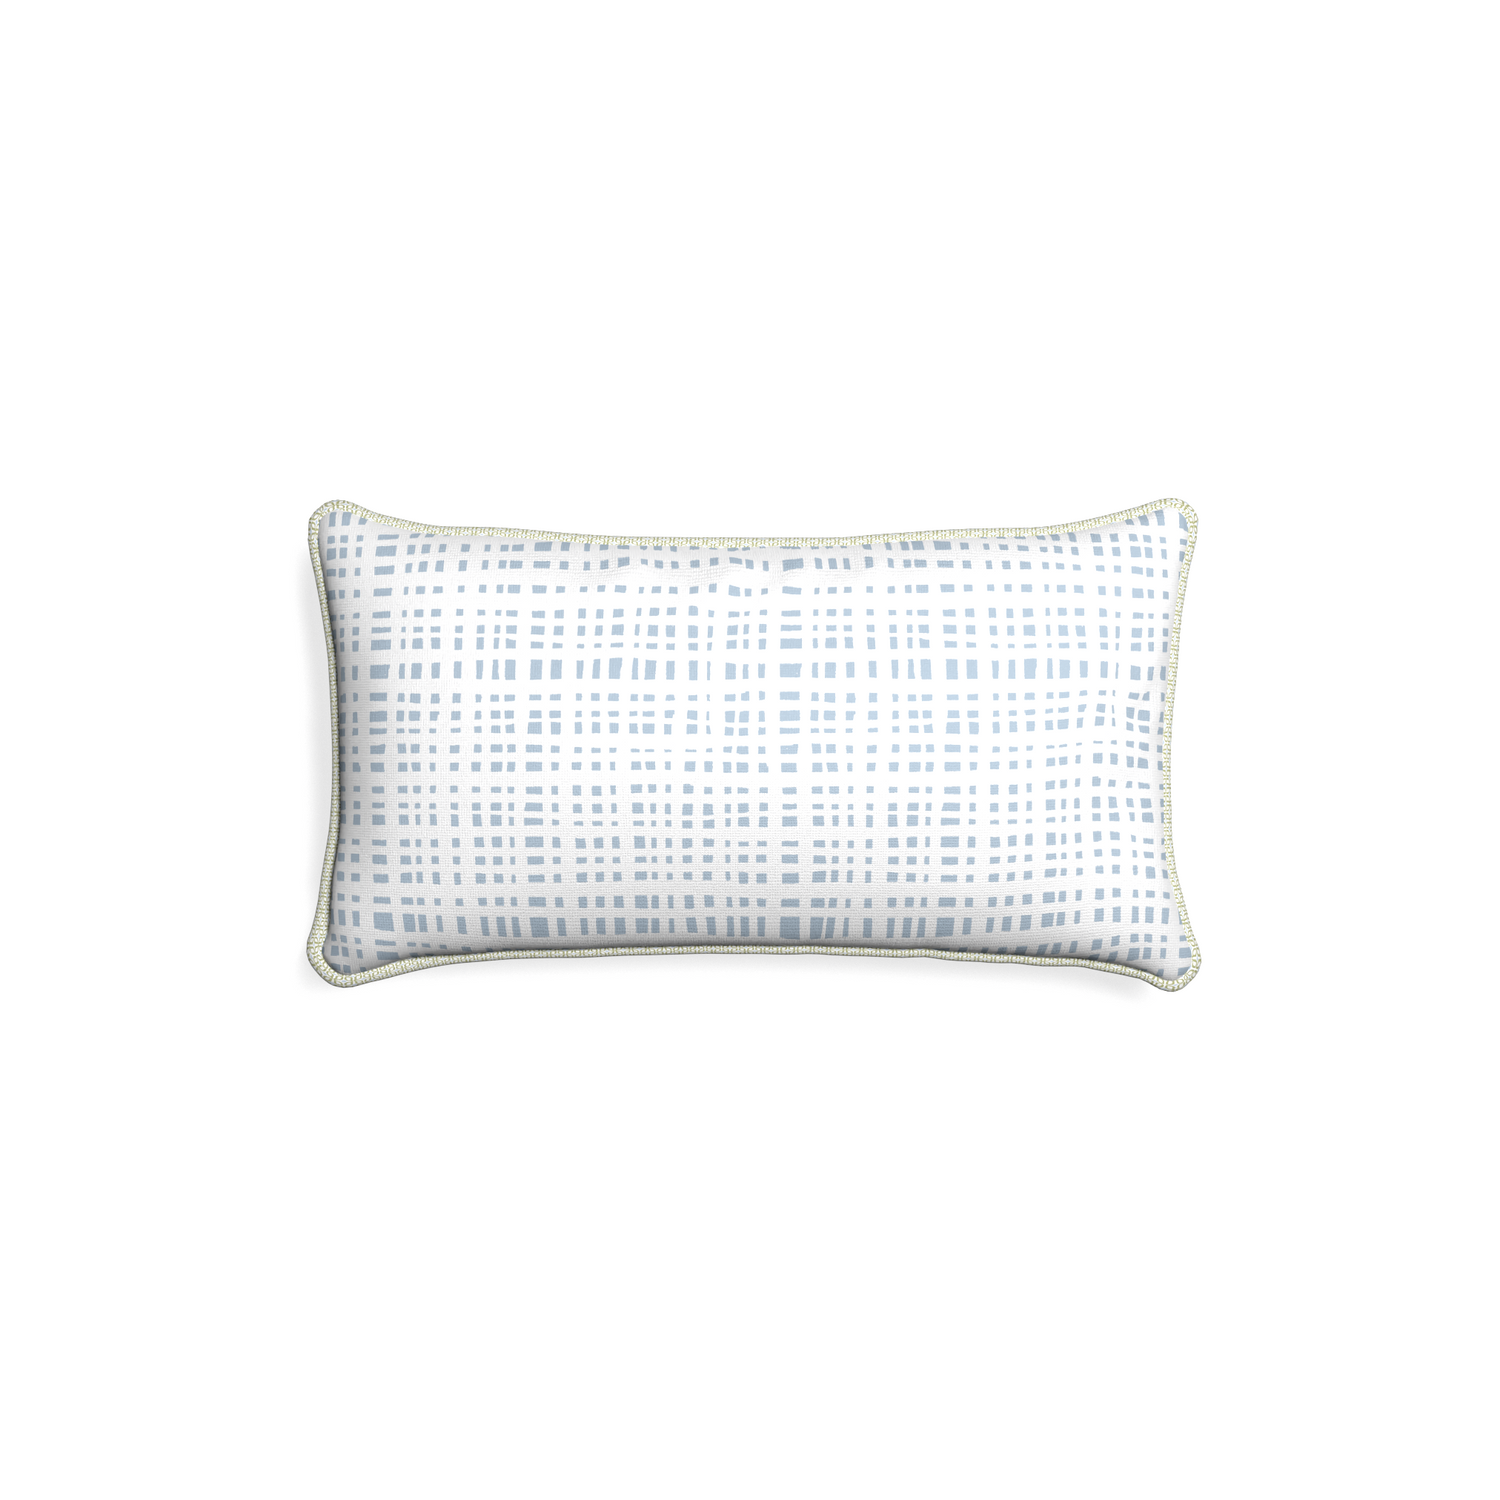 Petite-lumbar ginger sky custom plaid sky bluepillow with l piping on white background